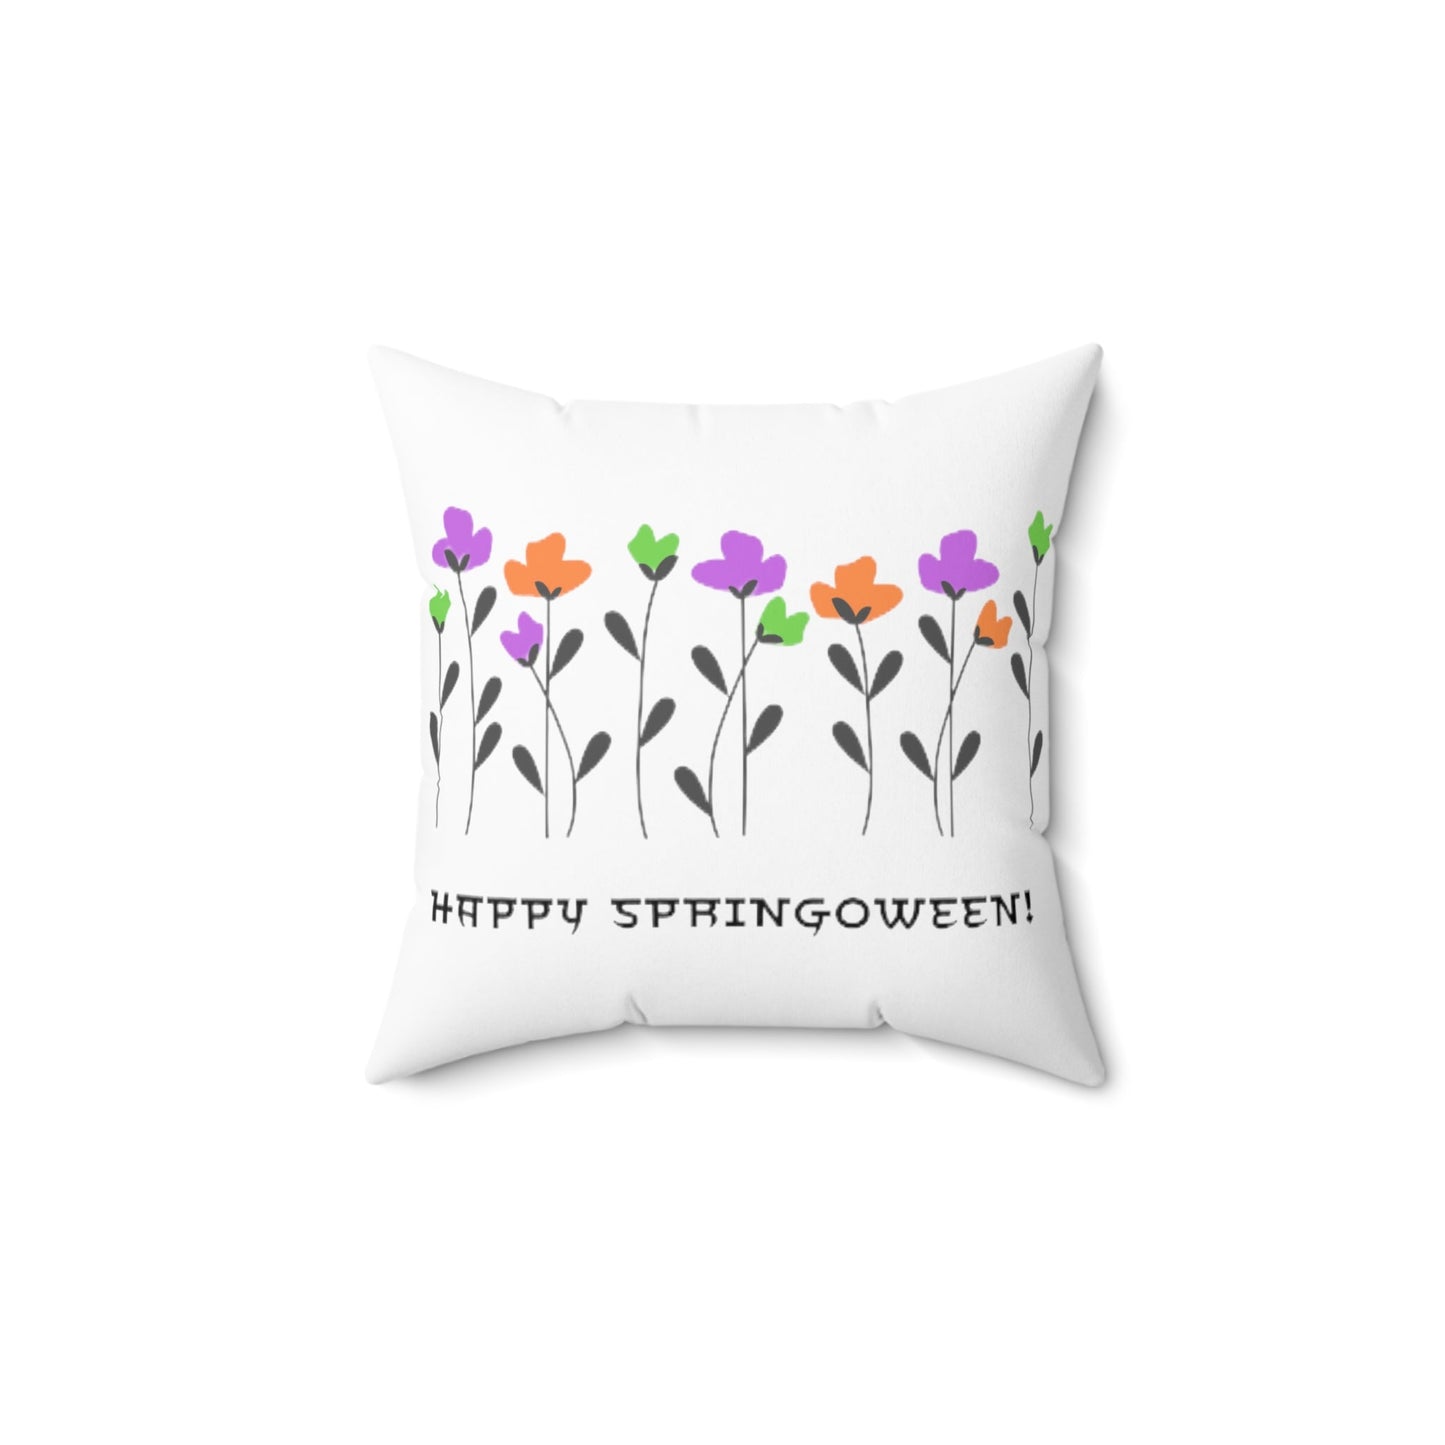 Happy Springoween Floral Spun Polyester Square Throw Pillow Halloween ColorsHome DecorVTZdesigns14" × 14"All Over PrintAOPBed